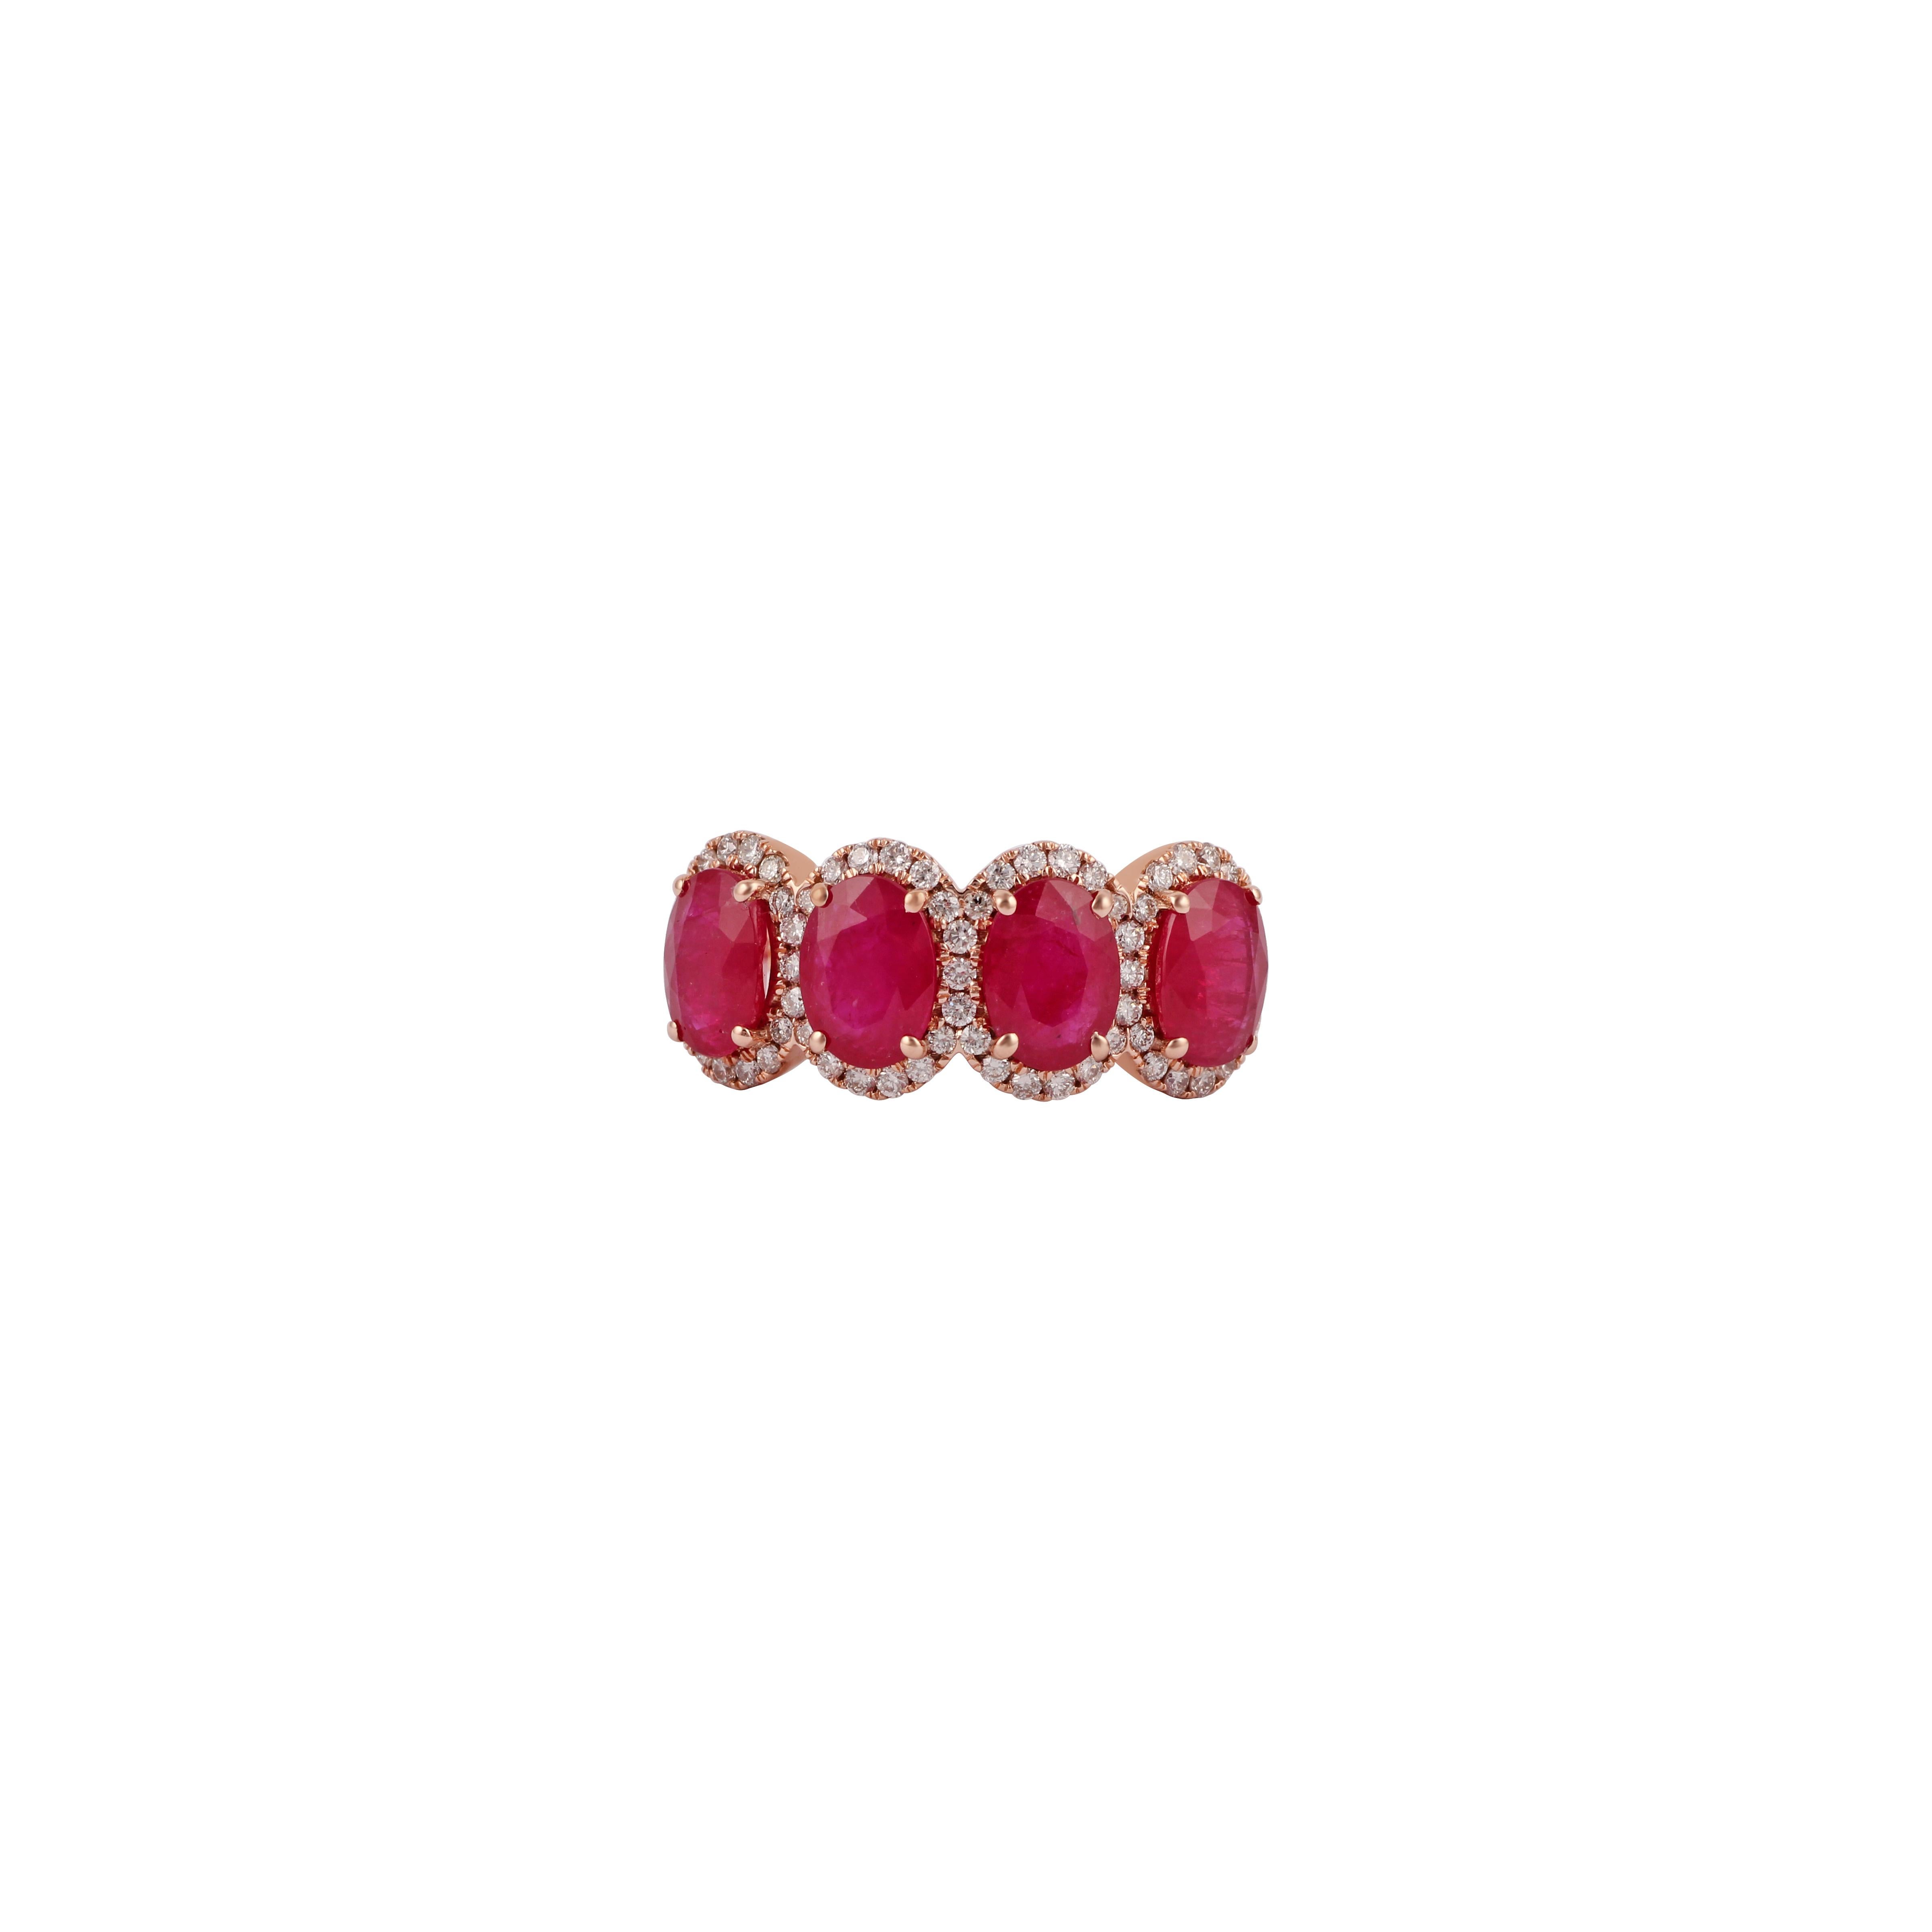 Its an elegant ruby & diamond ring studded in 18k rose gold with 4 pieces of oval shaped ruby weight 3.20 carat which is surrounded by 63 pieces of round shaped diamond weight 0.46 carat, this entire ring is studded in 18k rose gold weight 4.42